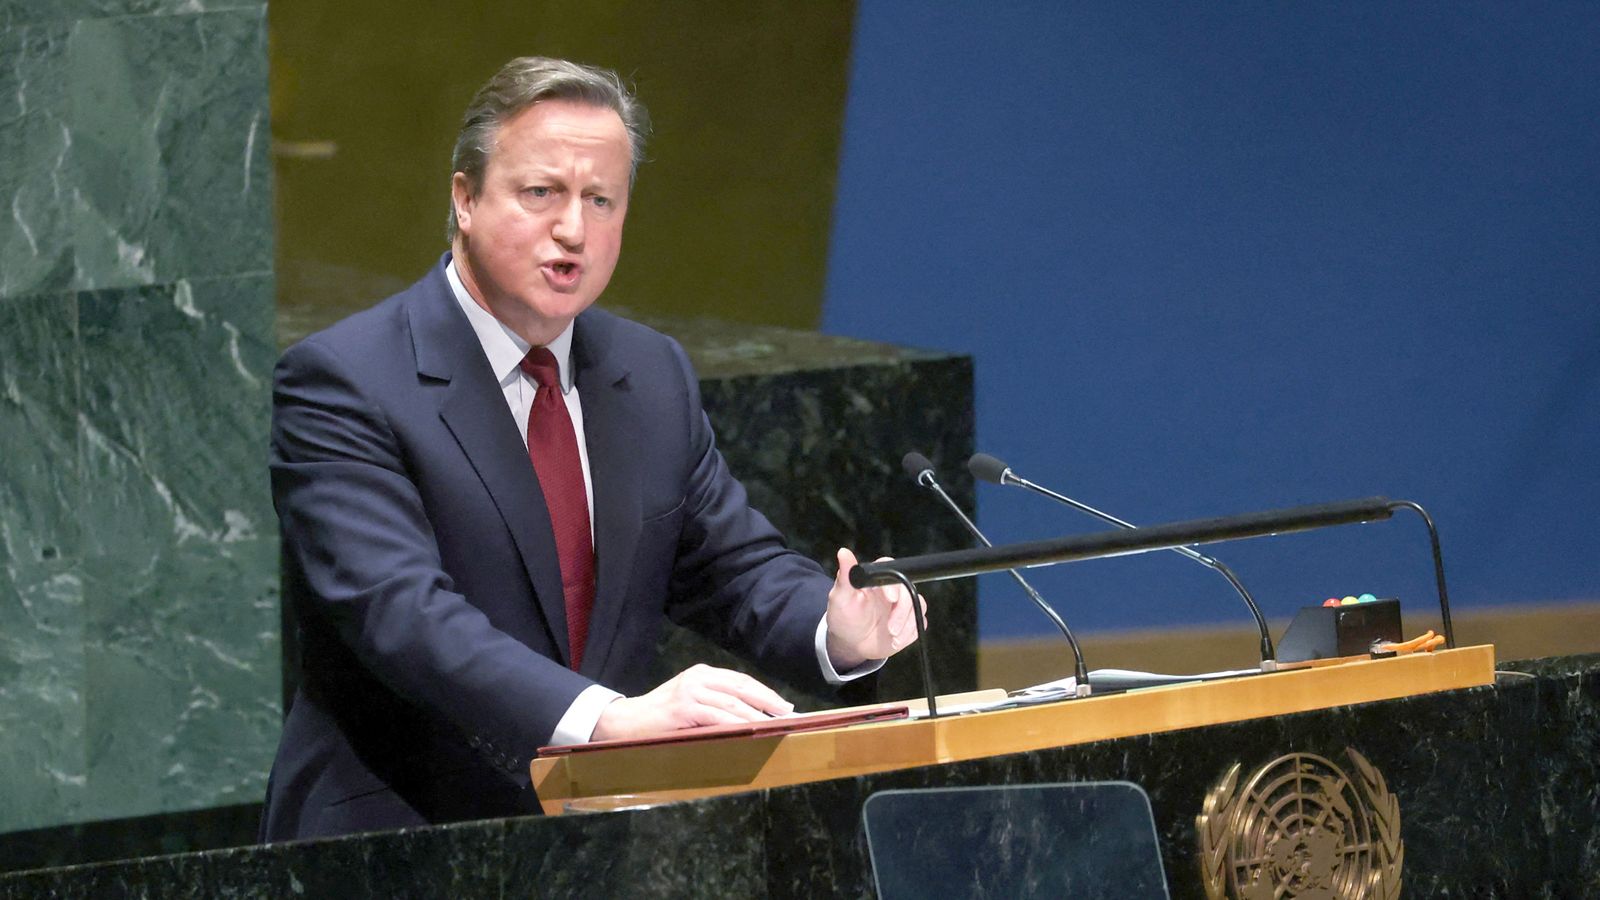 'We must recognise cost of giving up' support for Ukraine, David Cameron tells UN